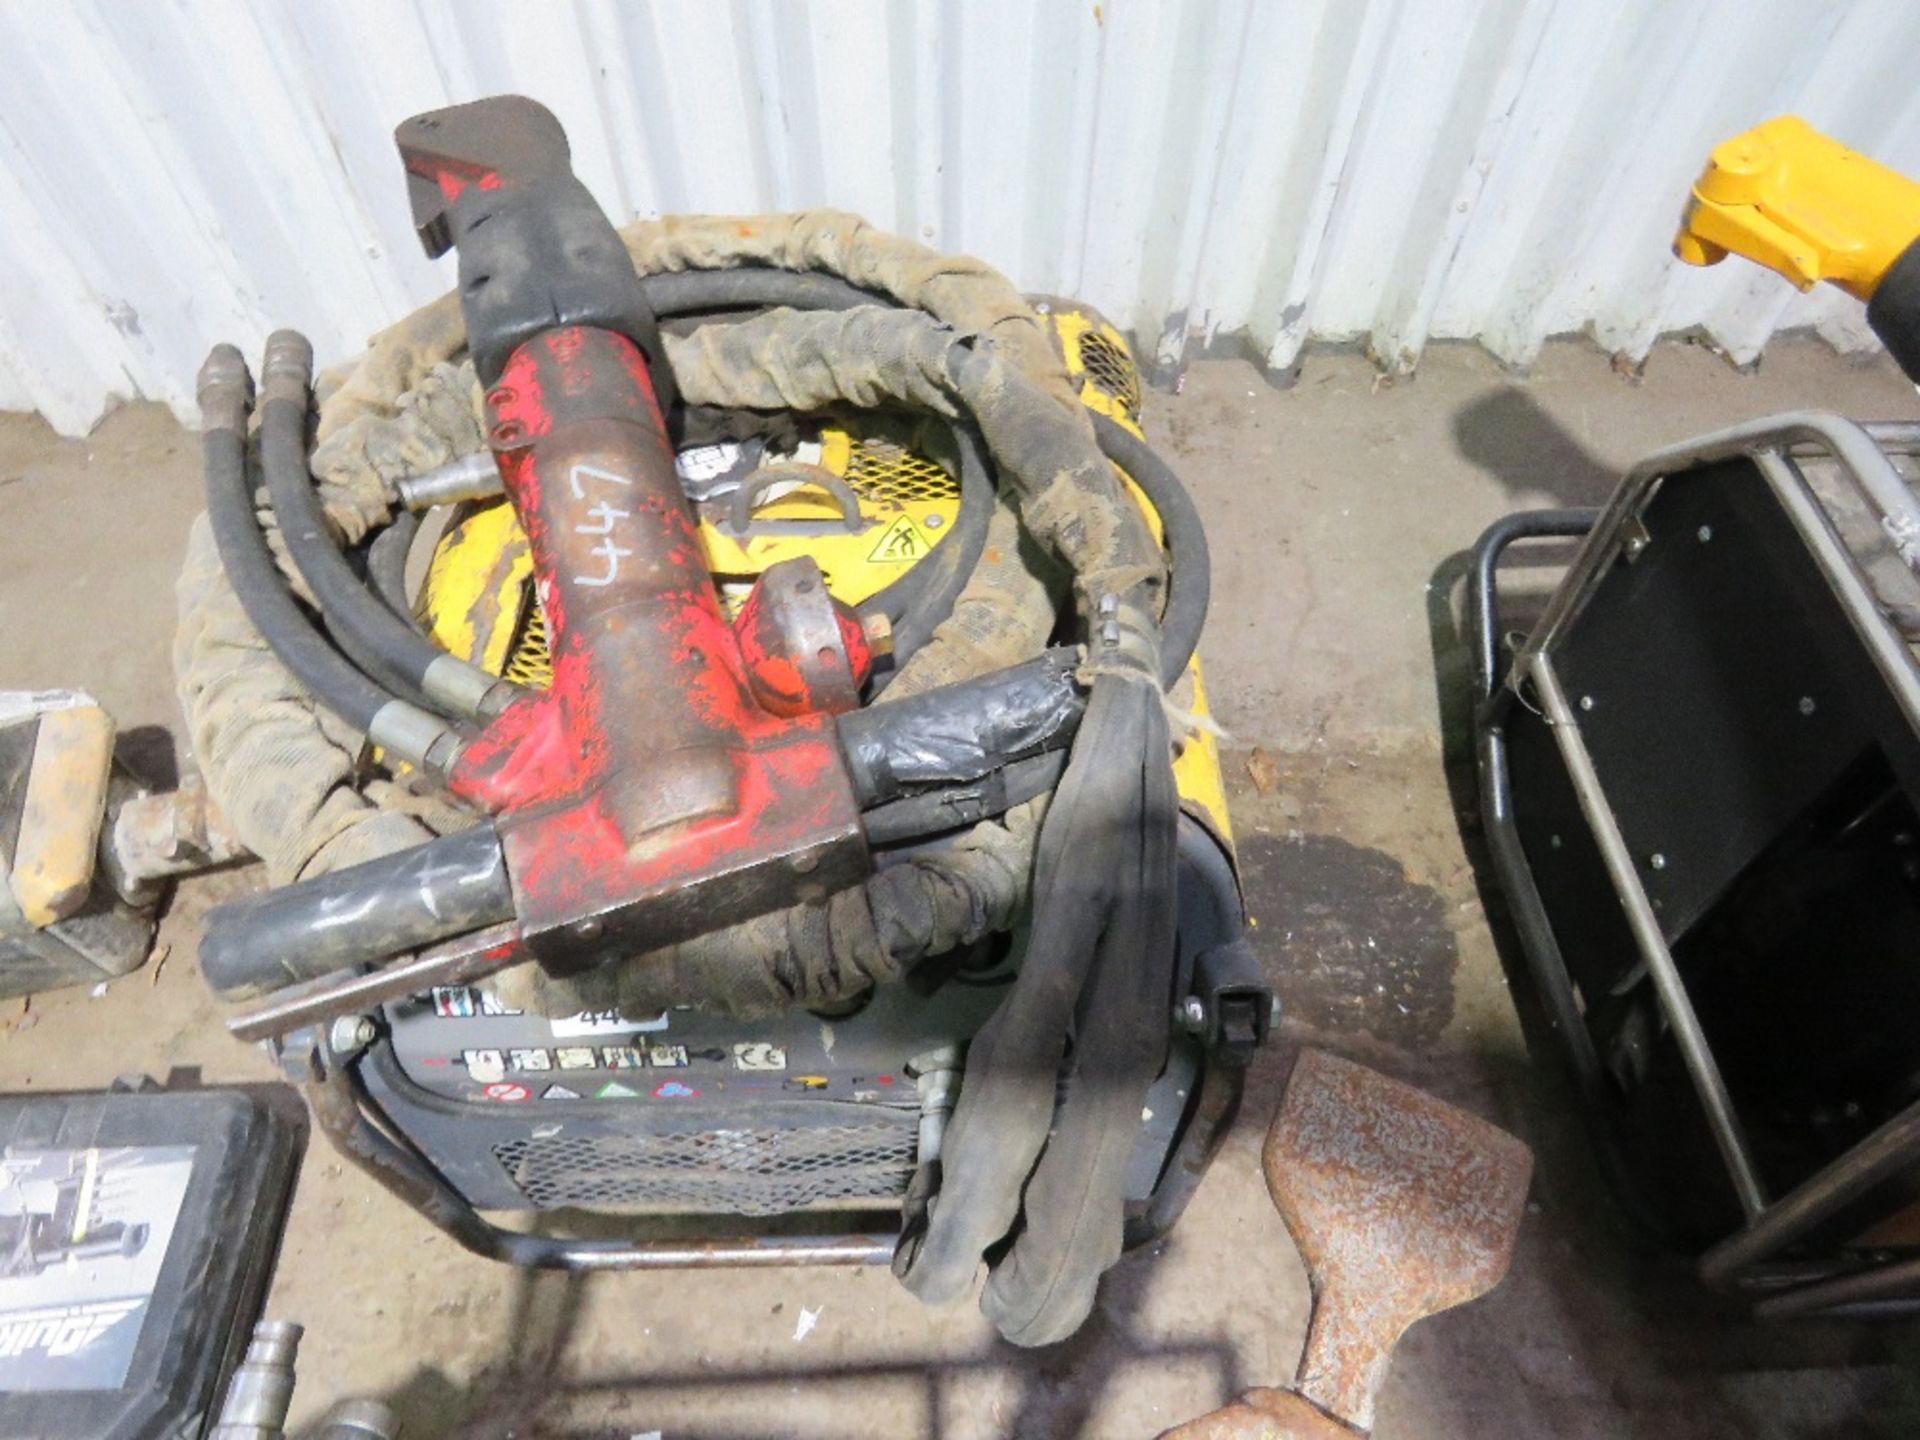 ATLAS COPCO HYDRAULIC BREAKER PACK WITH HOSE AND GUN.